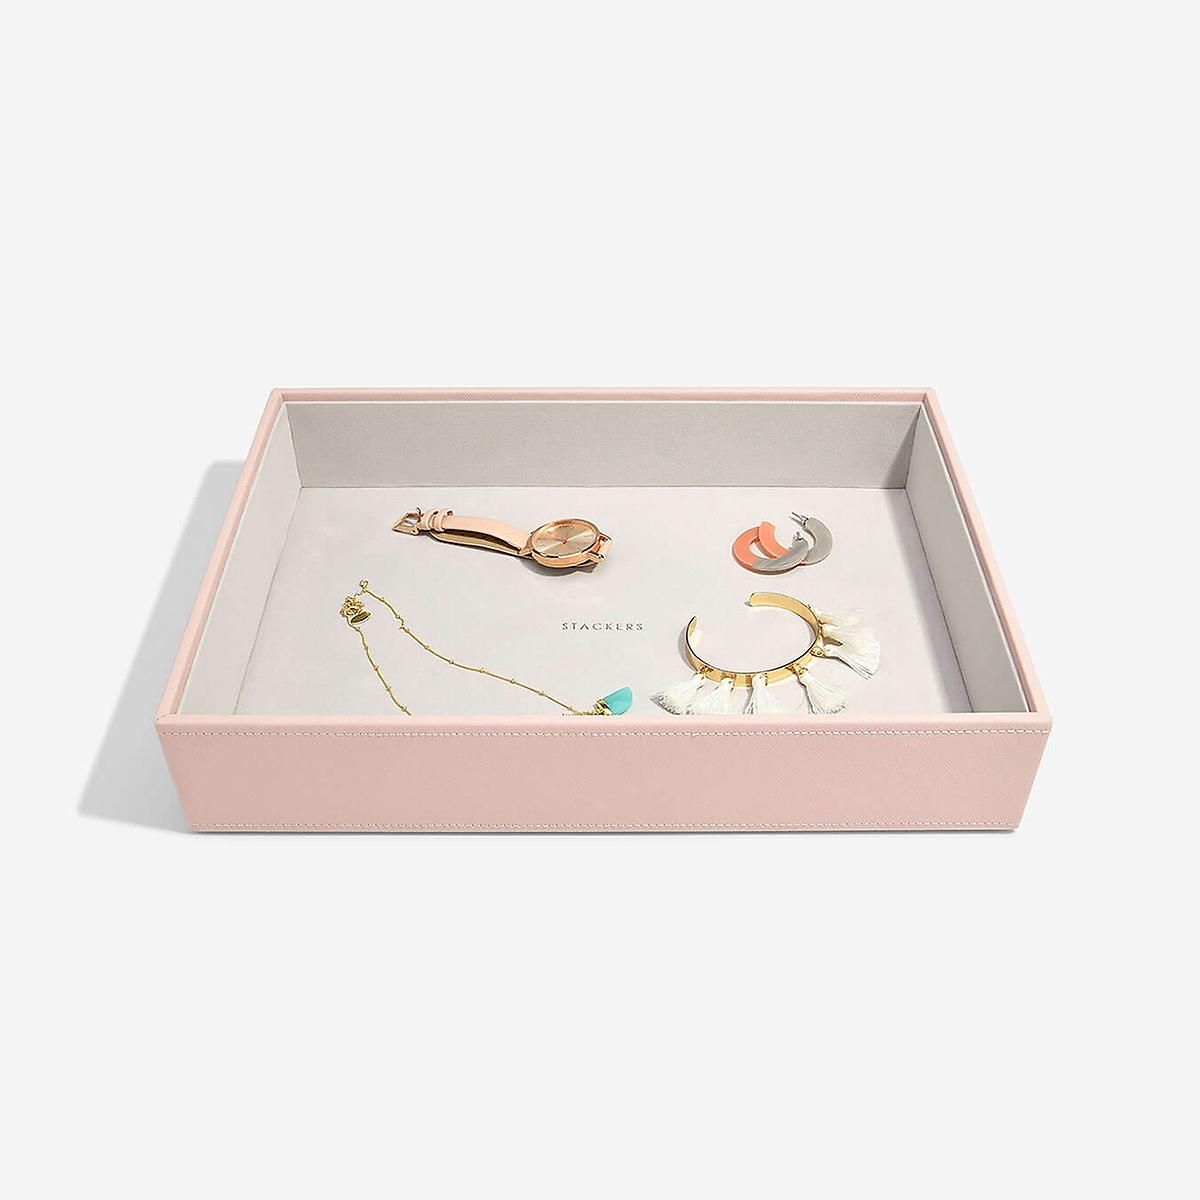 Stackers Blush Supersize Jewelry Box Collection | The Container Store